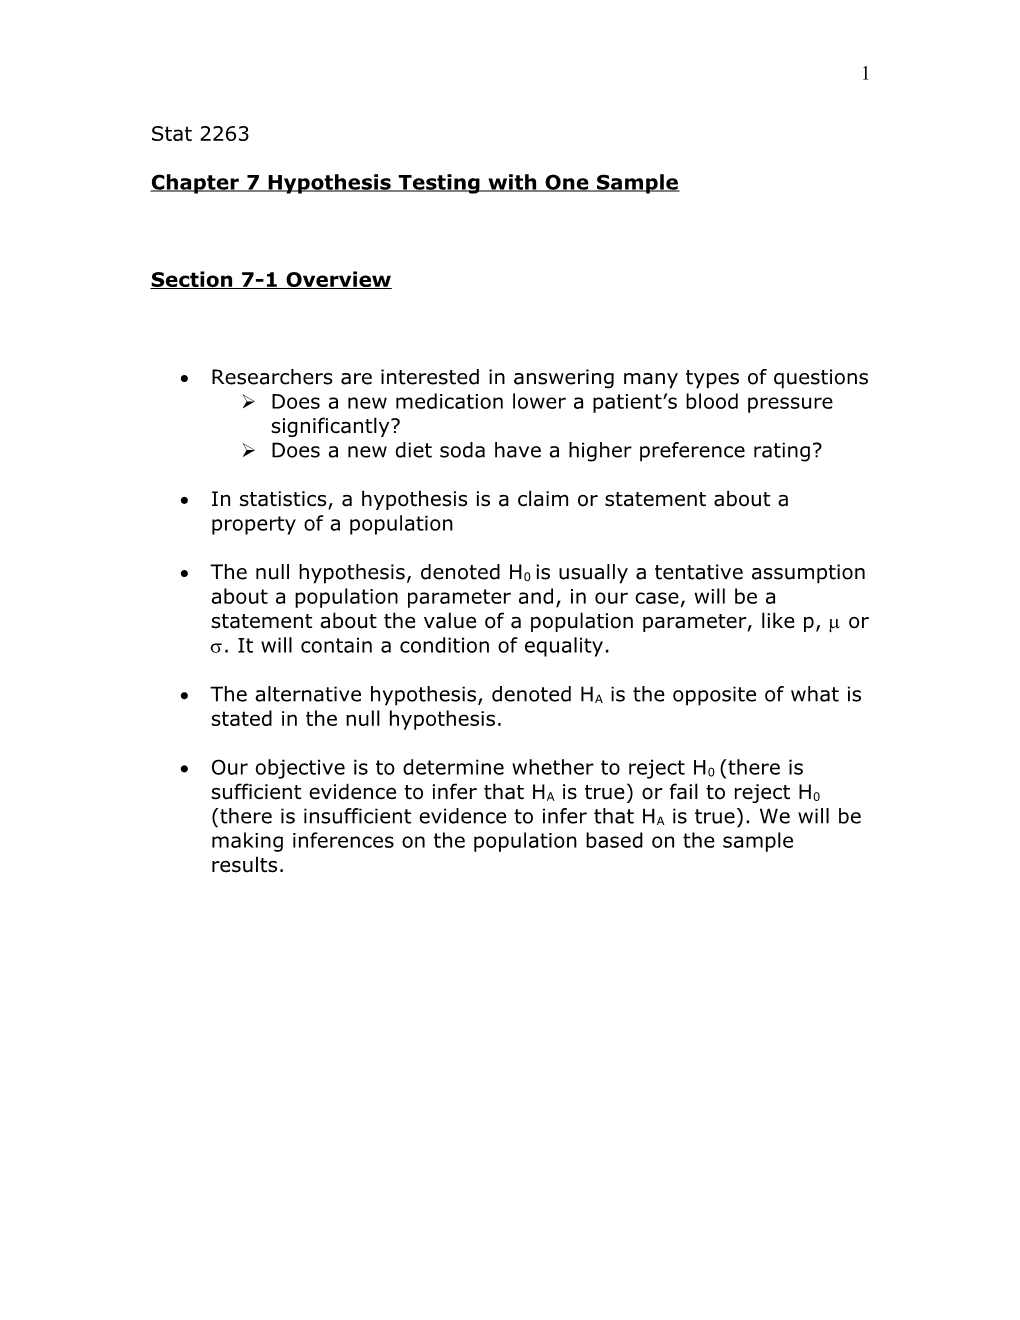 Chapter 7 Hypothesis Testing with One Sample